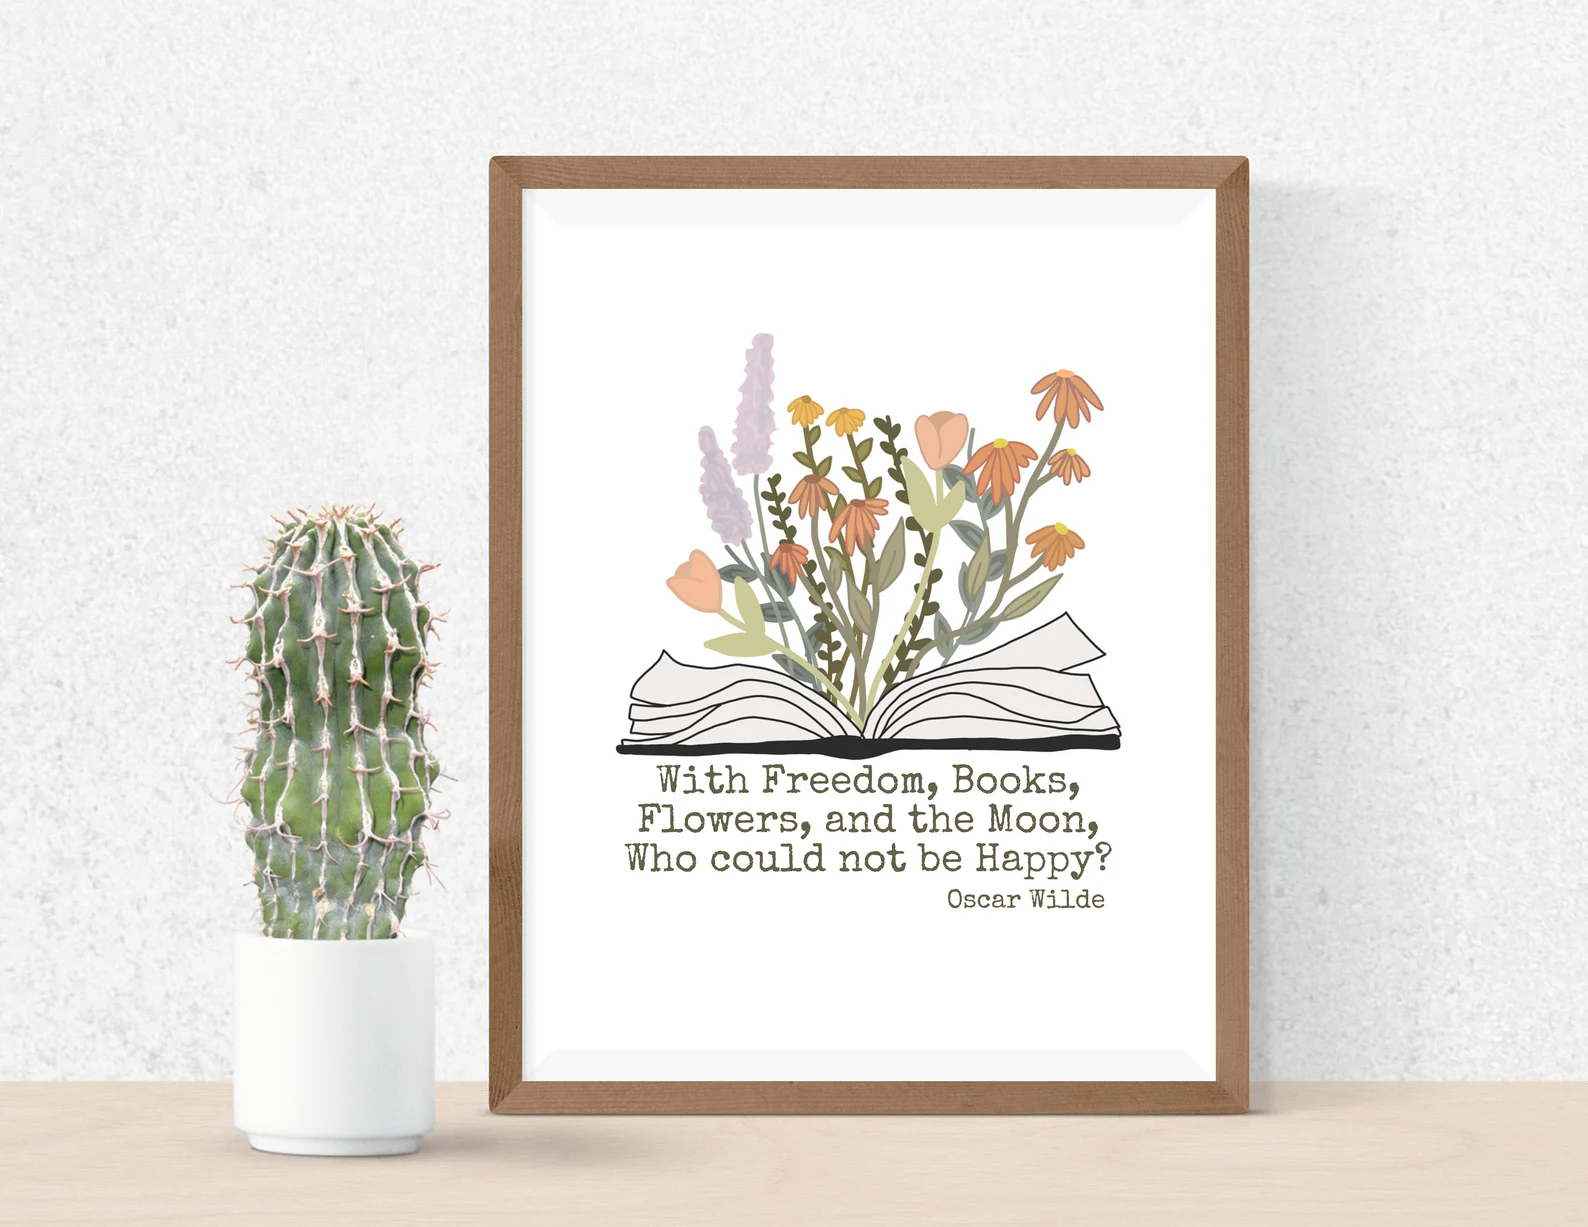 a photo of a framed poster with the text "With freedom, books, flowers, and the moon, who could not be happy?" - Oscar Wilde